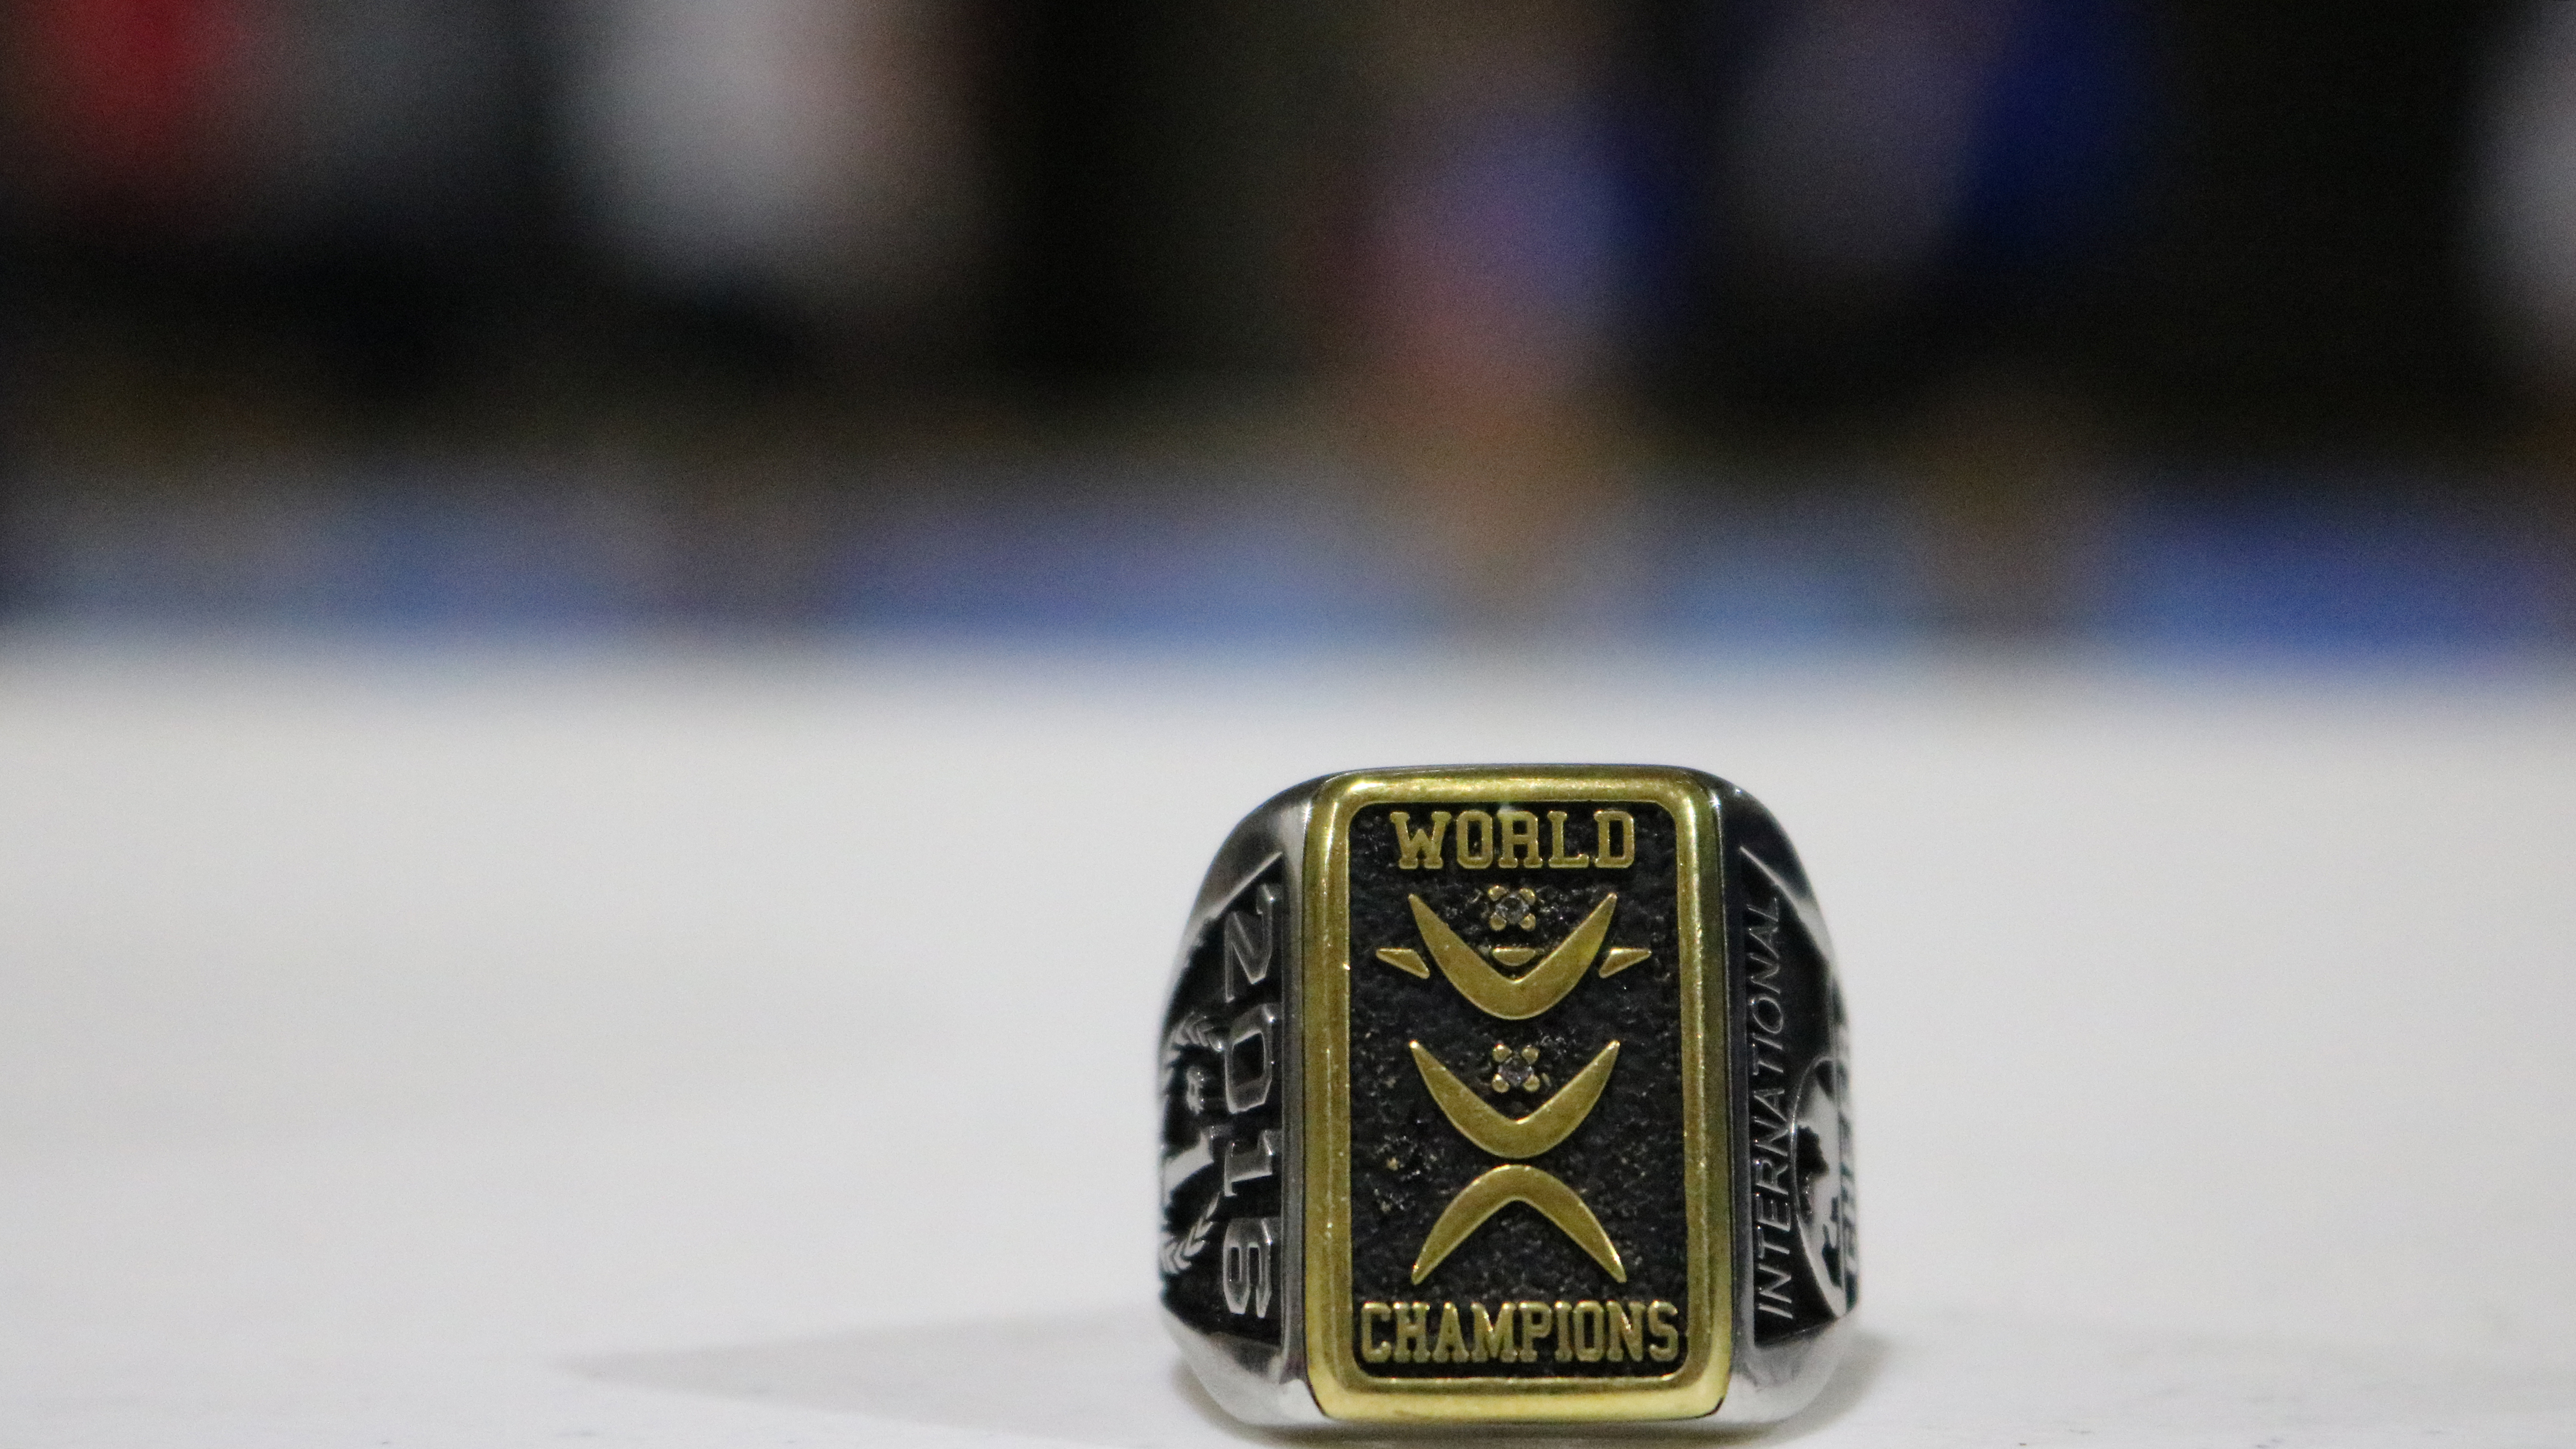 The USA Cheer is the winningest team in the International Cheer Union. Winning teams are awarded an ICU World Champion ring.